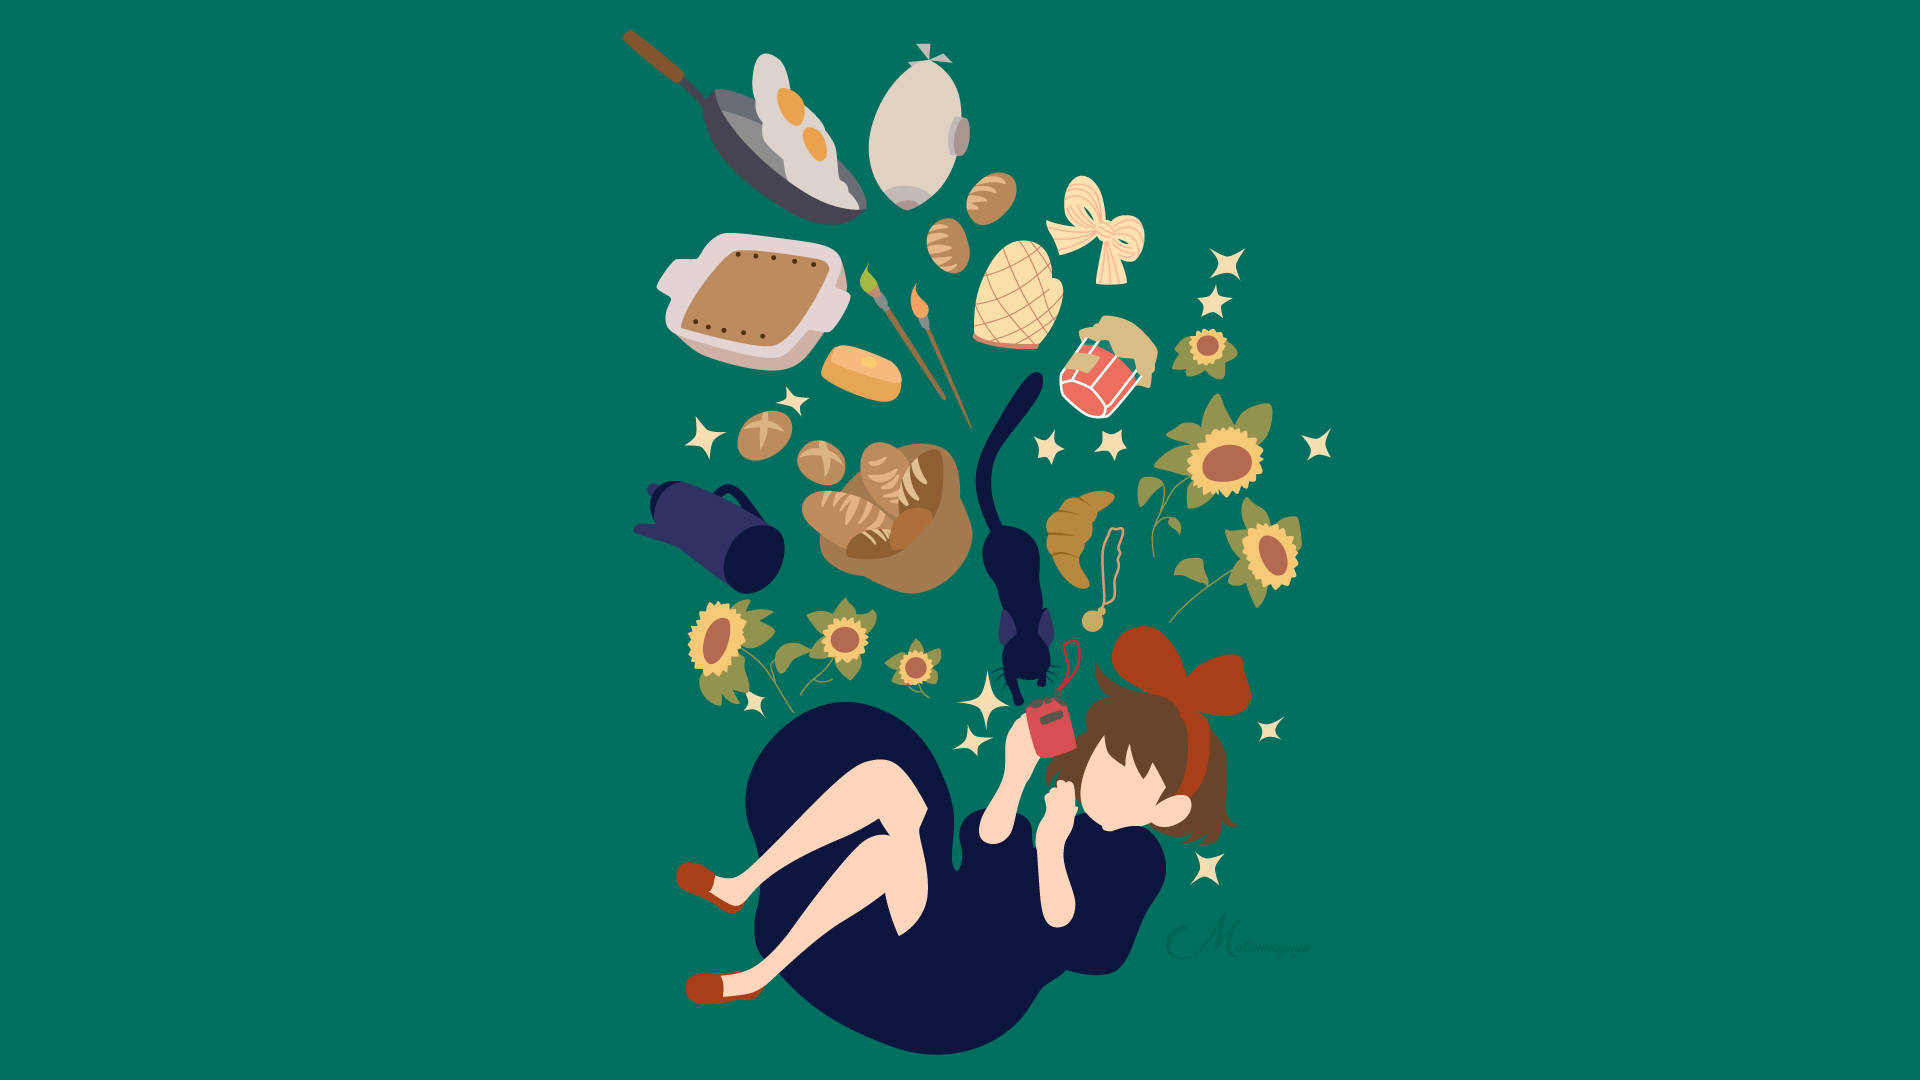 Kiki Vector Art From Kikis Delivery Service Background